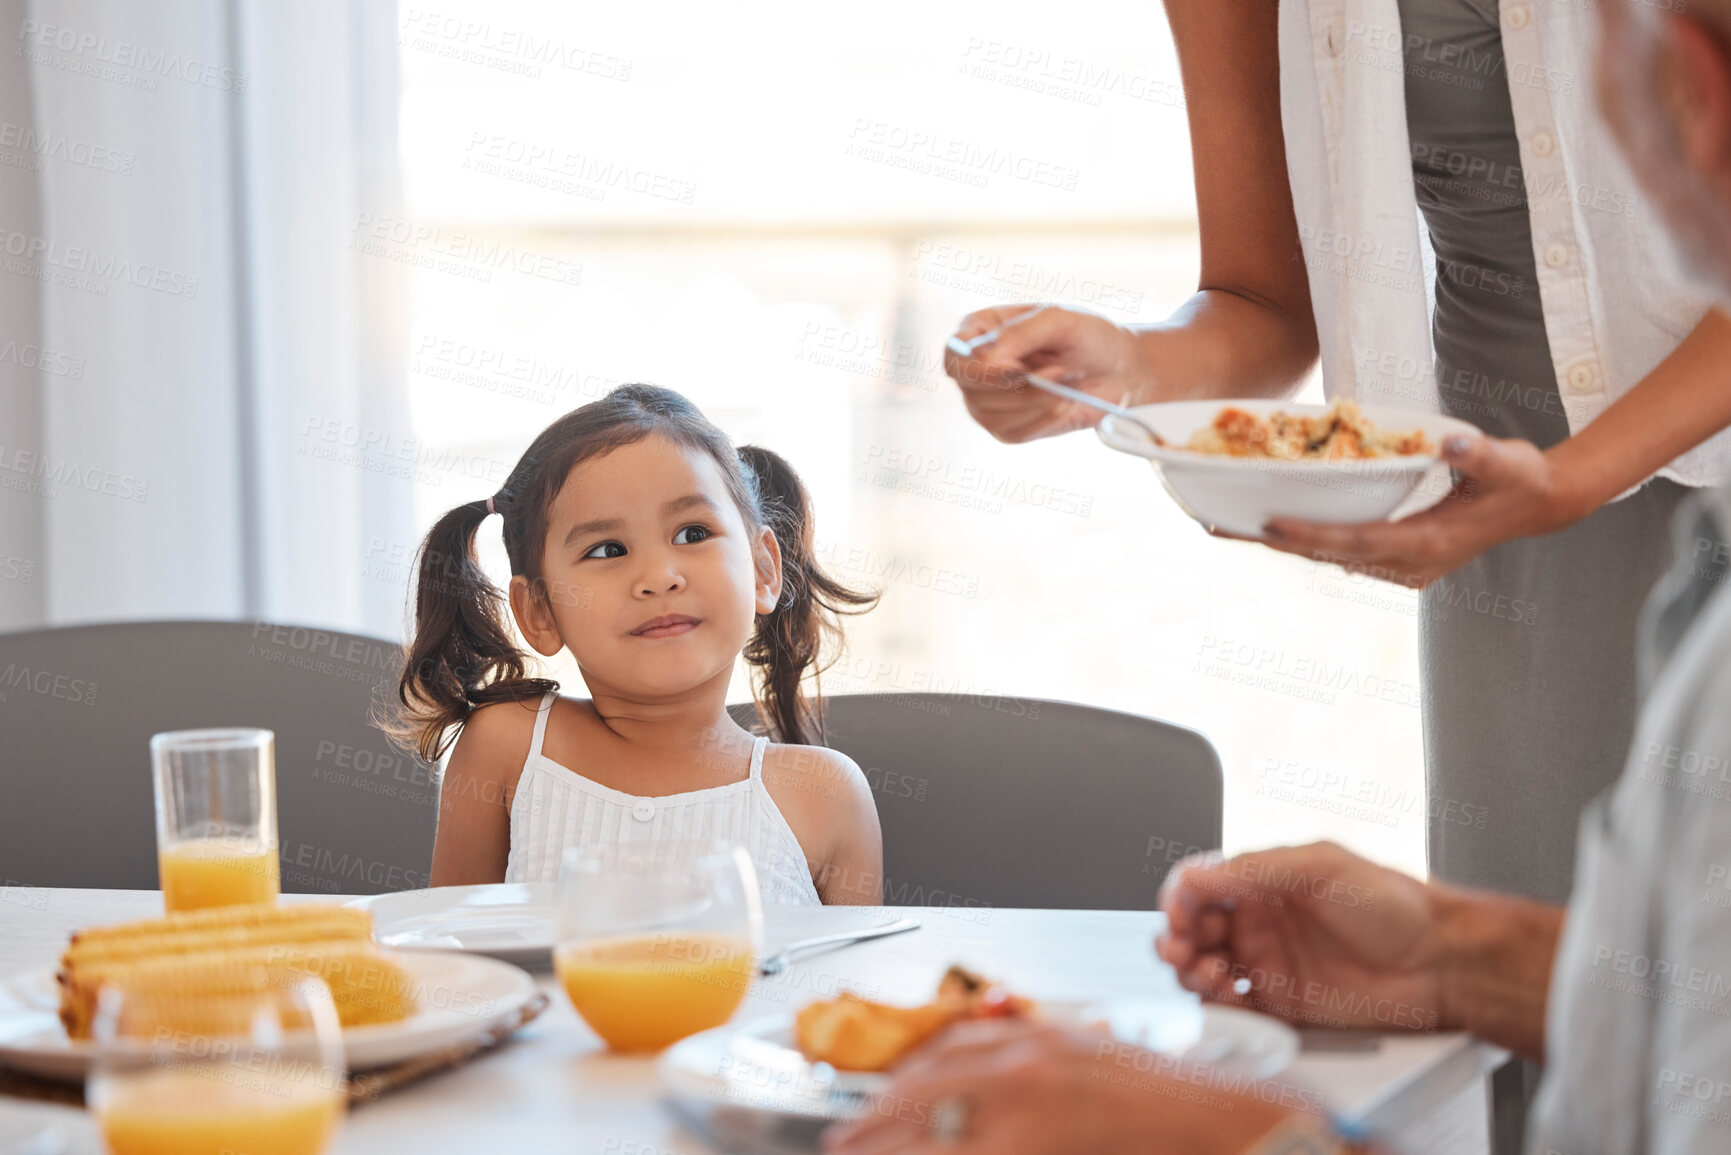 Buy stock photo Hungry family, lunch food and child with hands of woman giving meal plate to youth kid at family reunion event. Love, happiness and young girl waiting for brunch buffet during quality bonding time